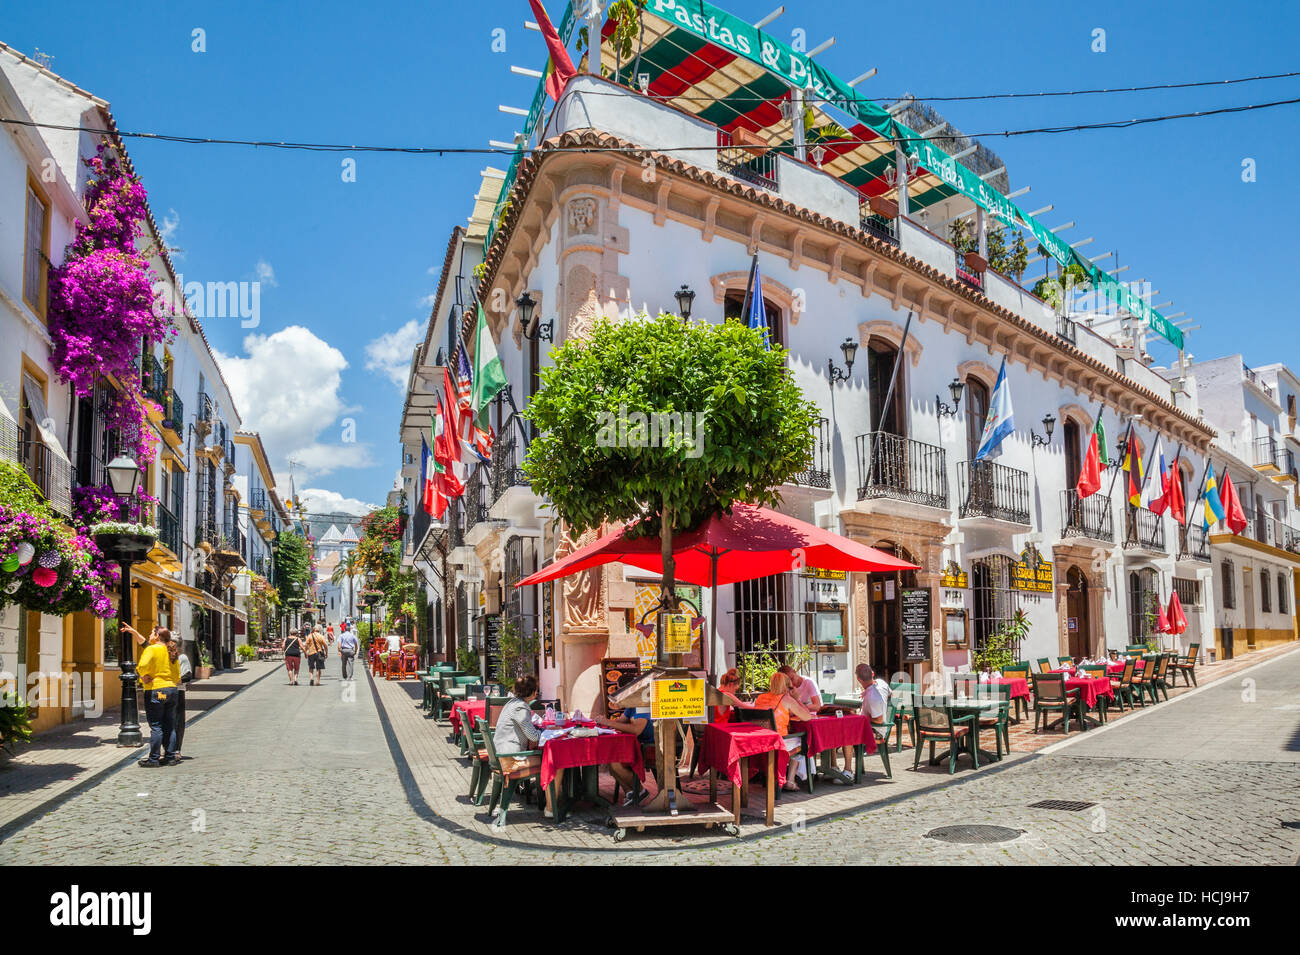 Spain, Andalusia, Province of Malaga, Costa del Sol, Marbella, junction of Calle Peral and Calle Chorrón at Casco Antiguo, Marbella Old Town Stock Photo